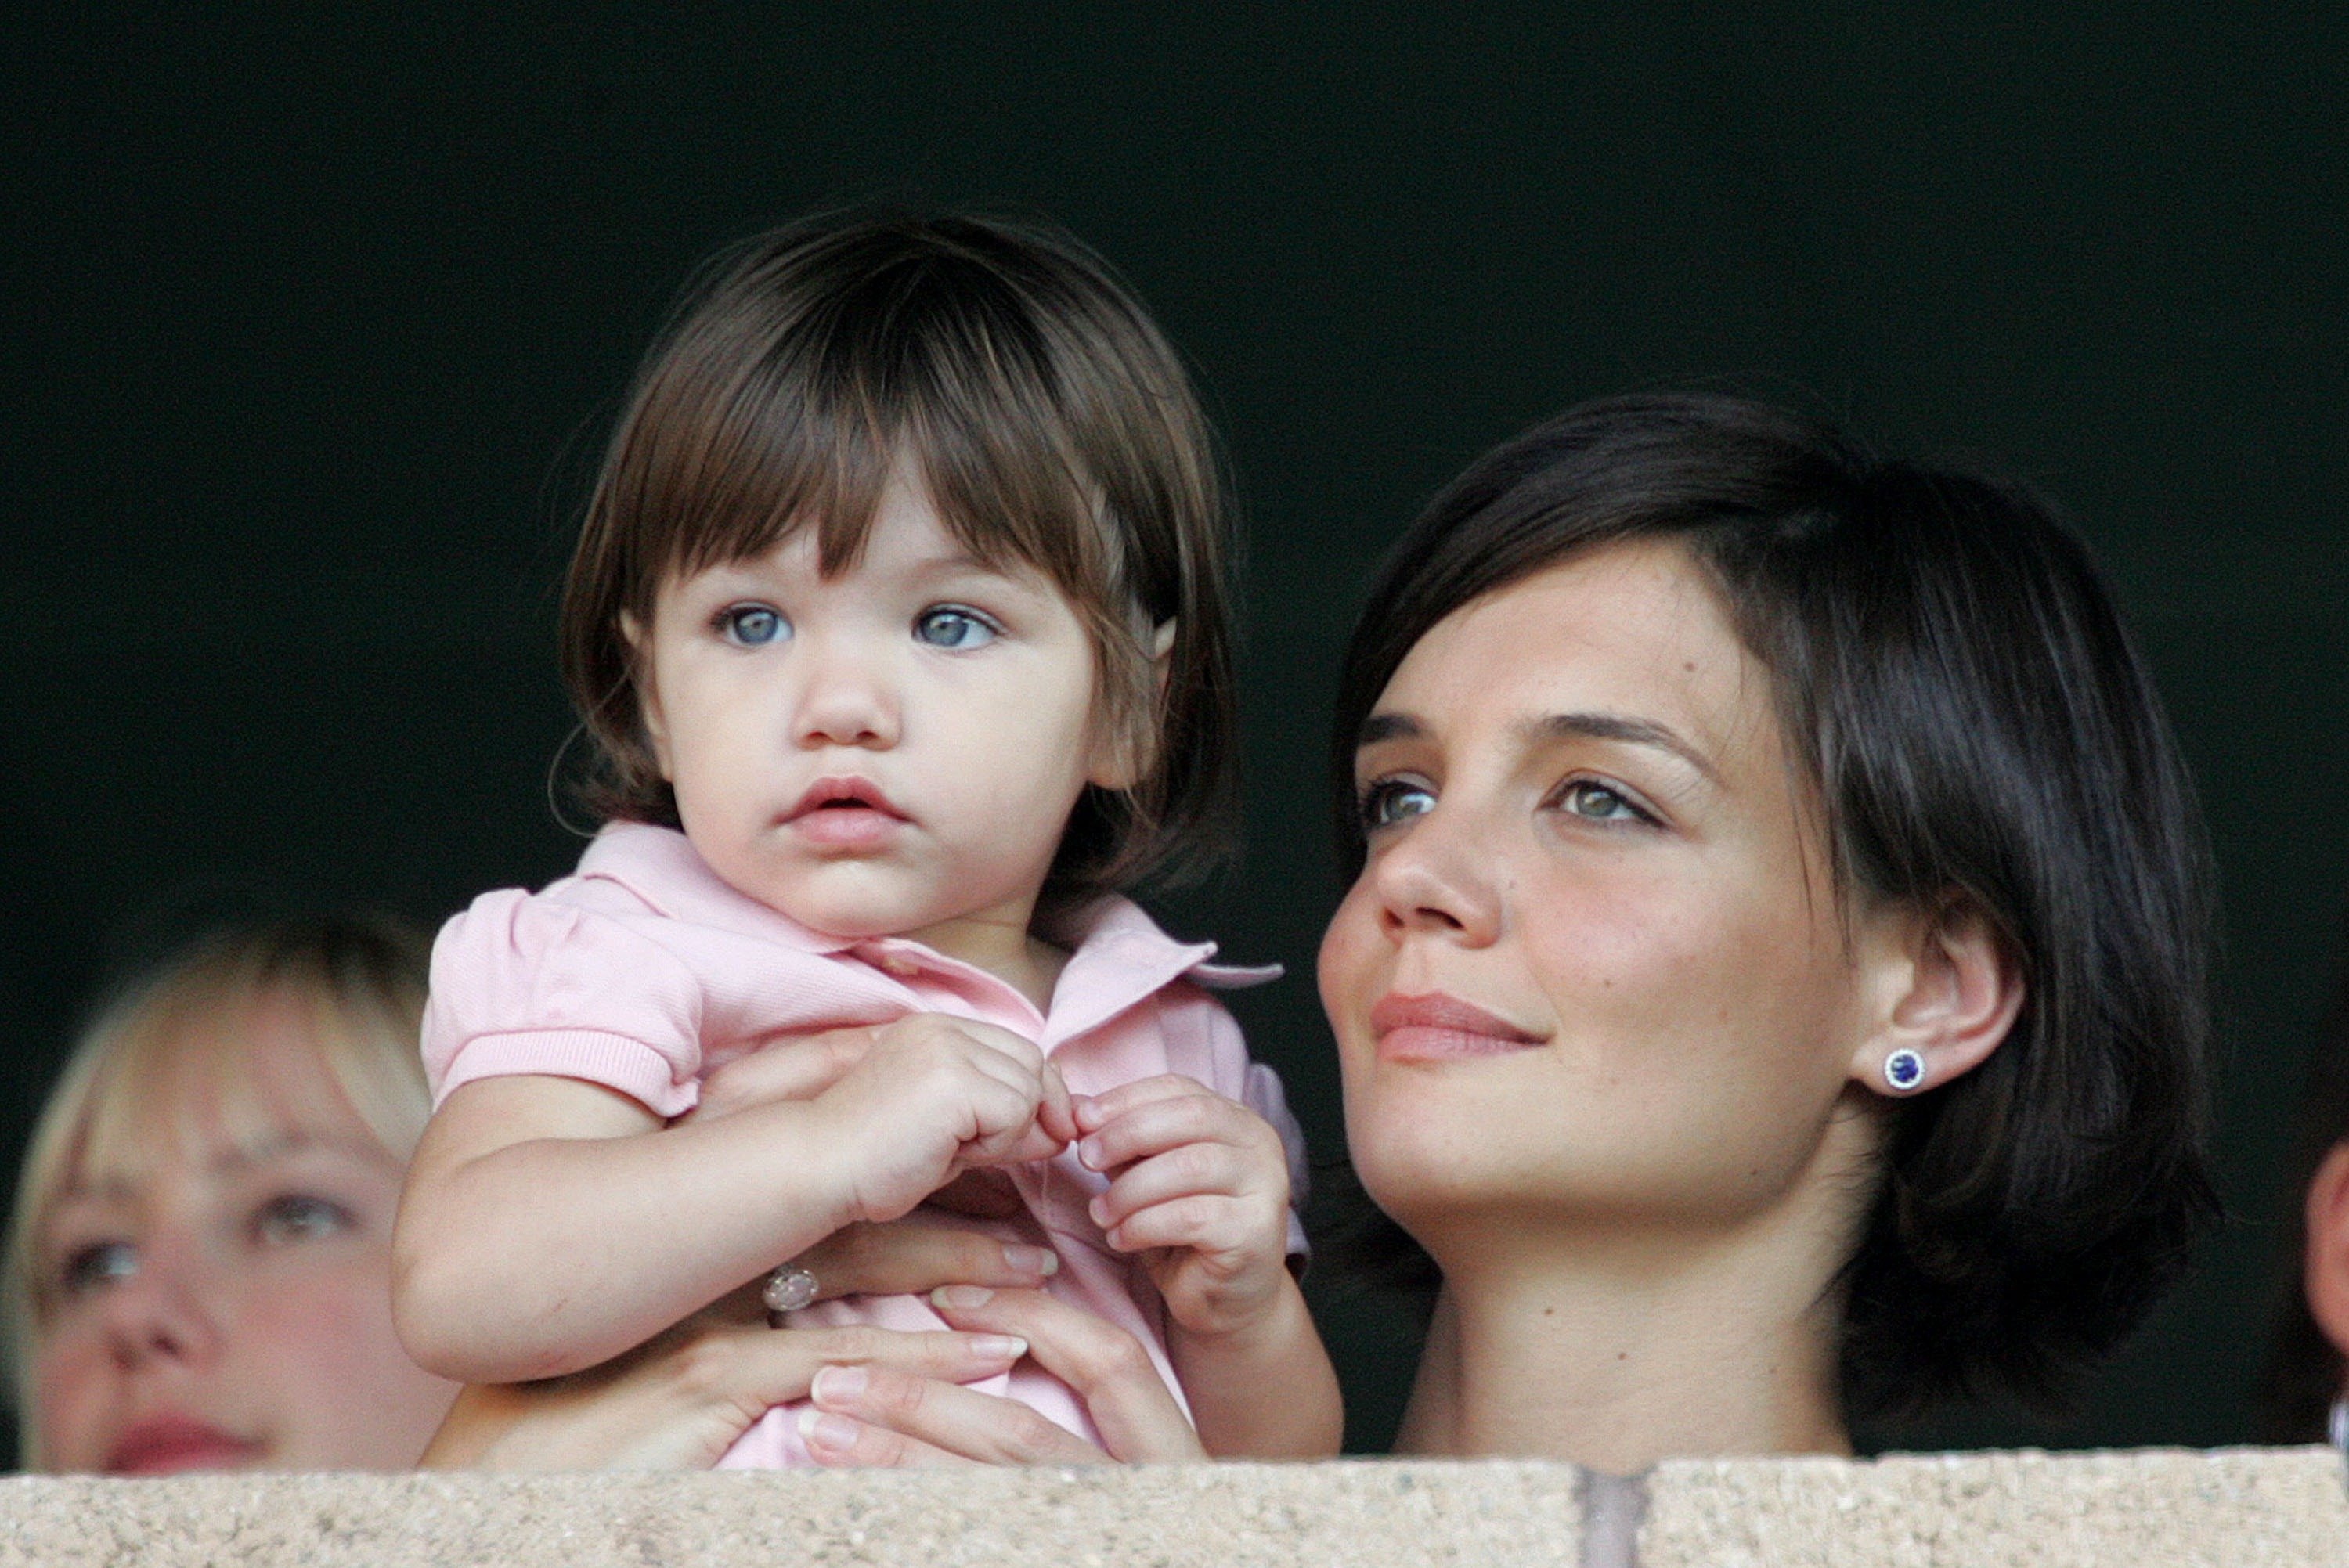 Actress Katie Holmes and daughter Suri at the Home Depot Center in Carson California on July 22 2007. | Source: Getty Images